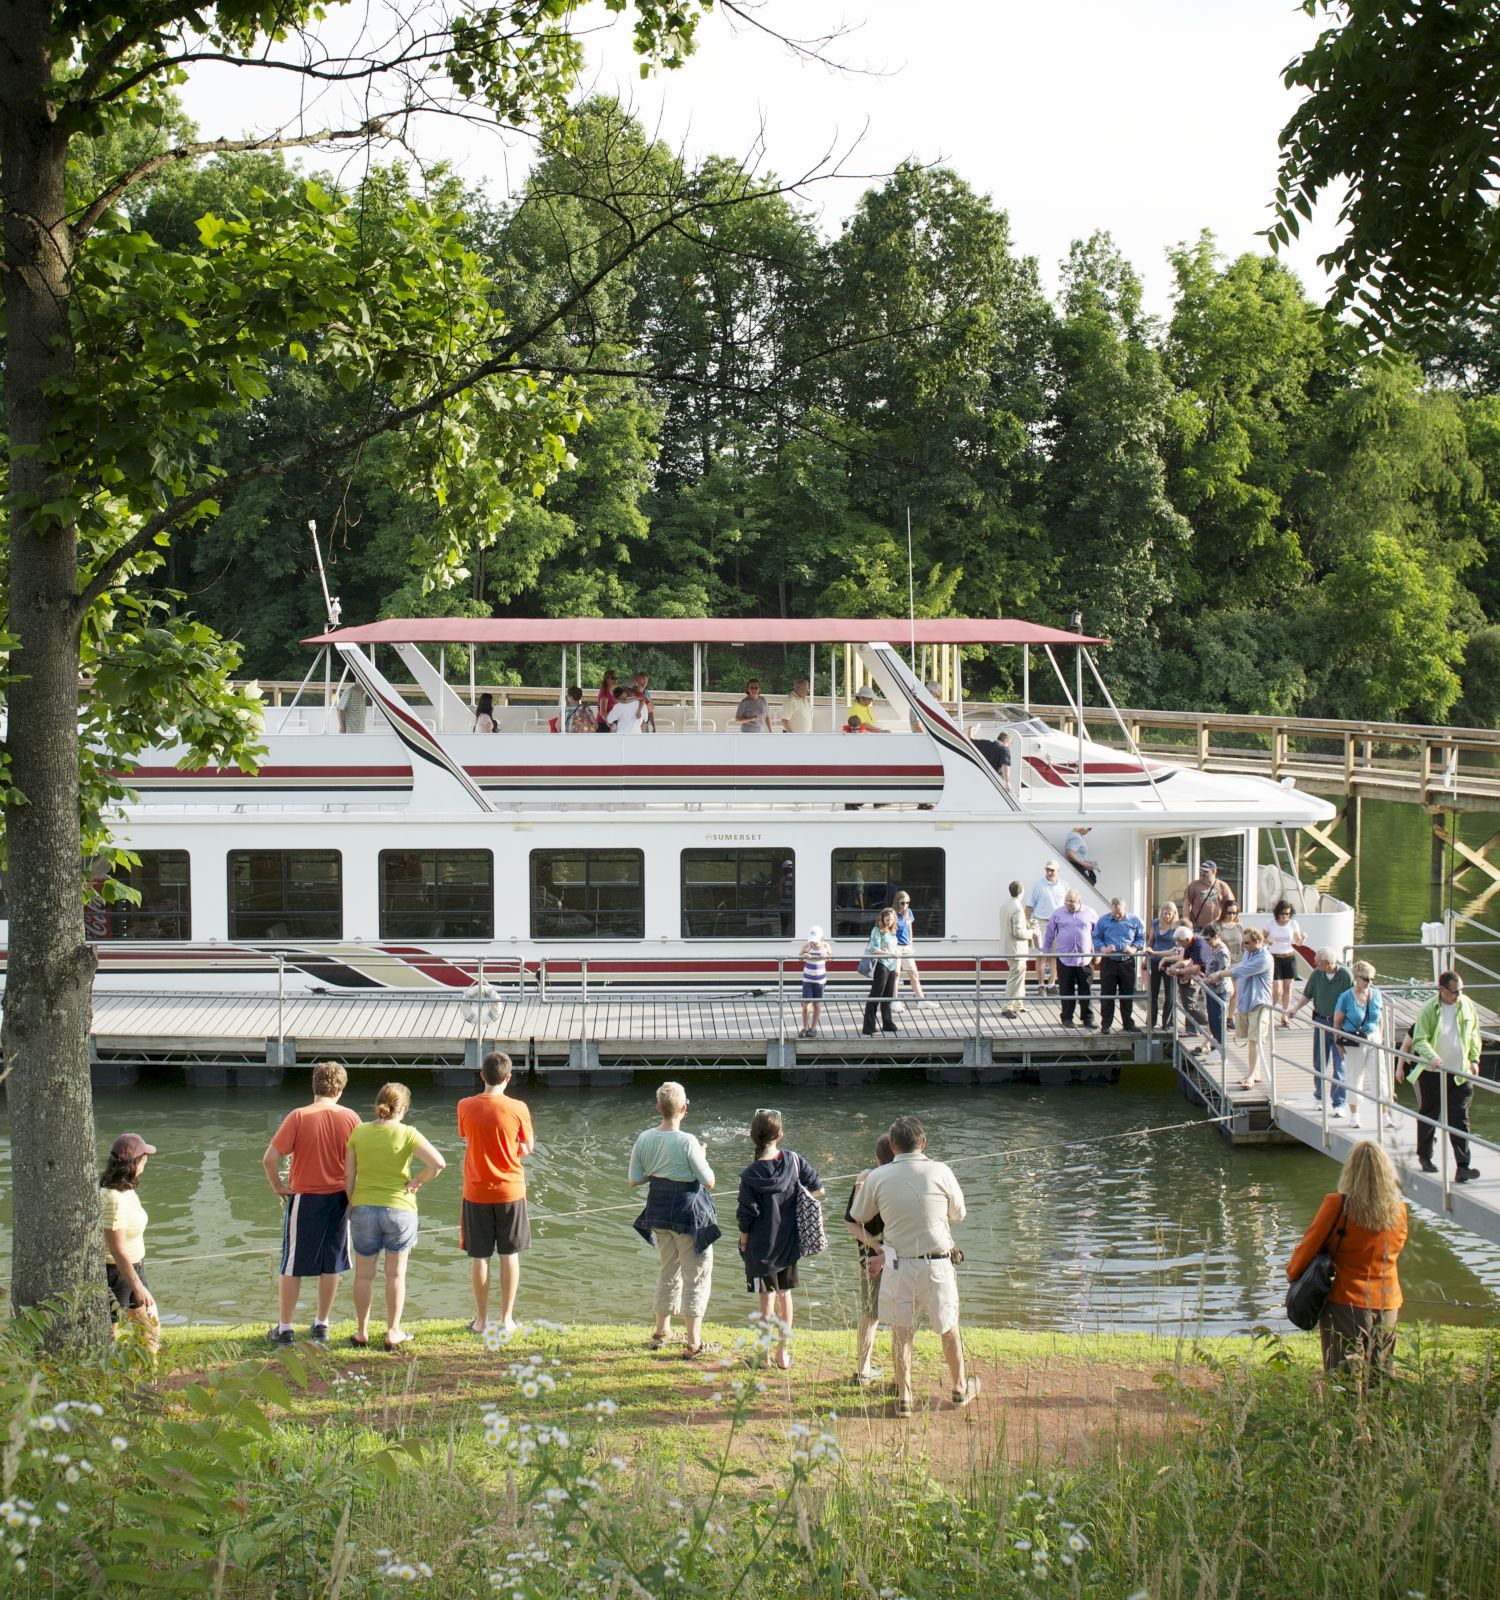 A group of people are boarding a white boat via a dock surrounded by greenery and trees. The scene is lively and looks peaceful.